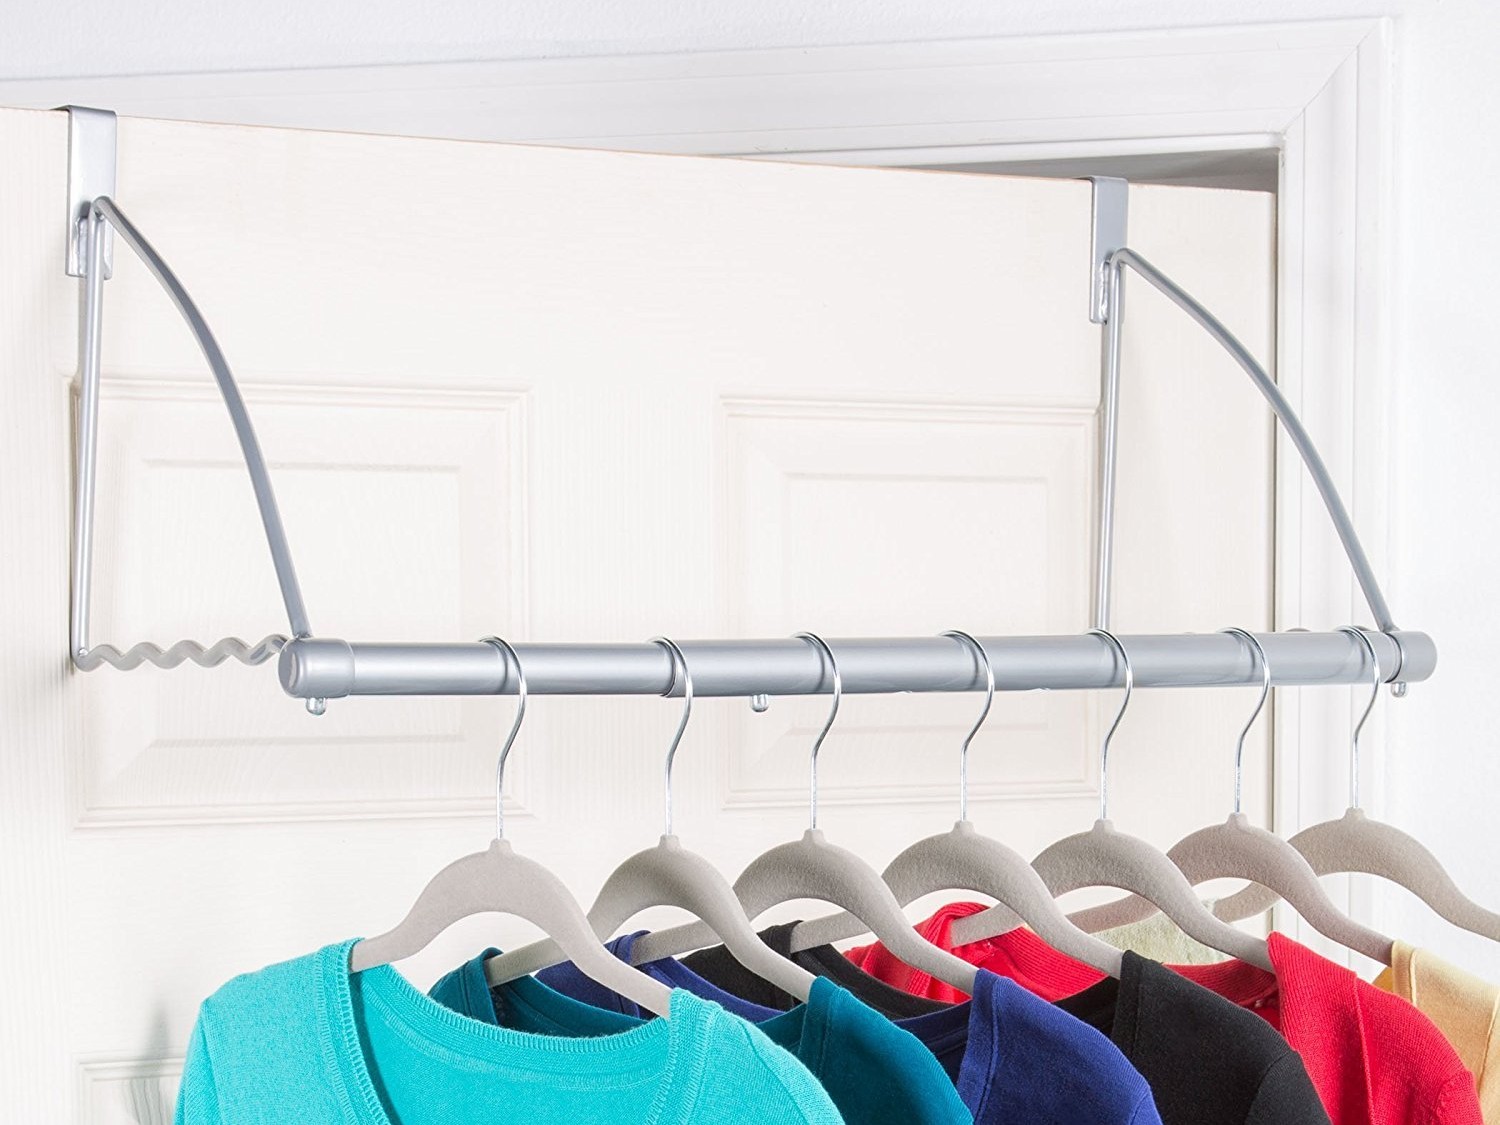 Types of Space-Saving Clotheslines: door mounted clothesline